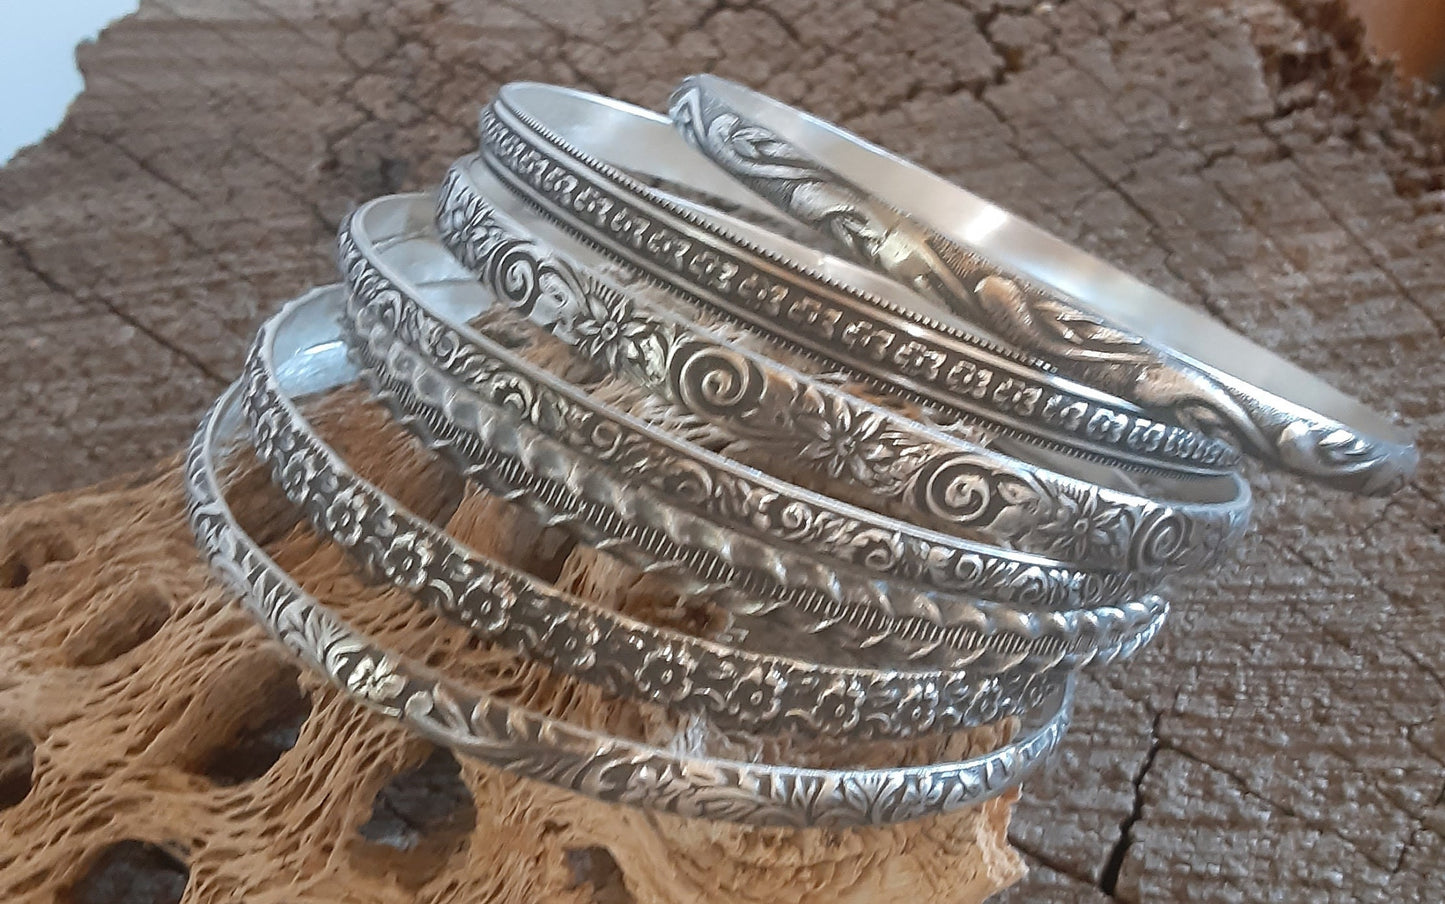 Bangle set of 7 different bangles in sterling silver - choose your size and quantity